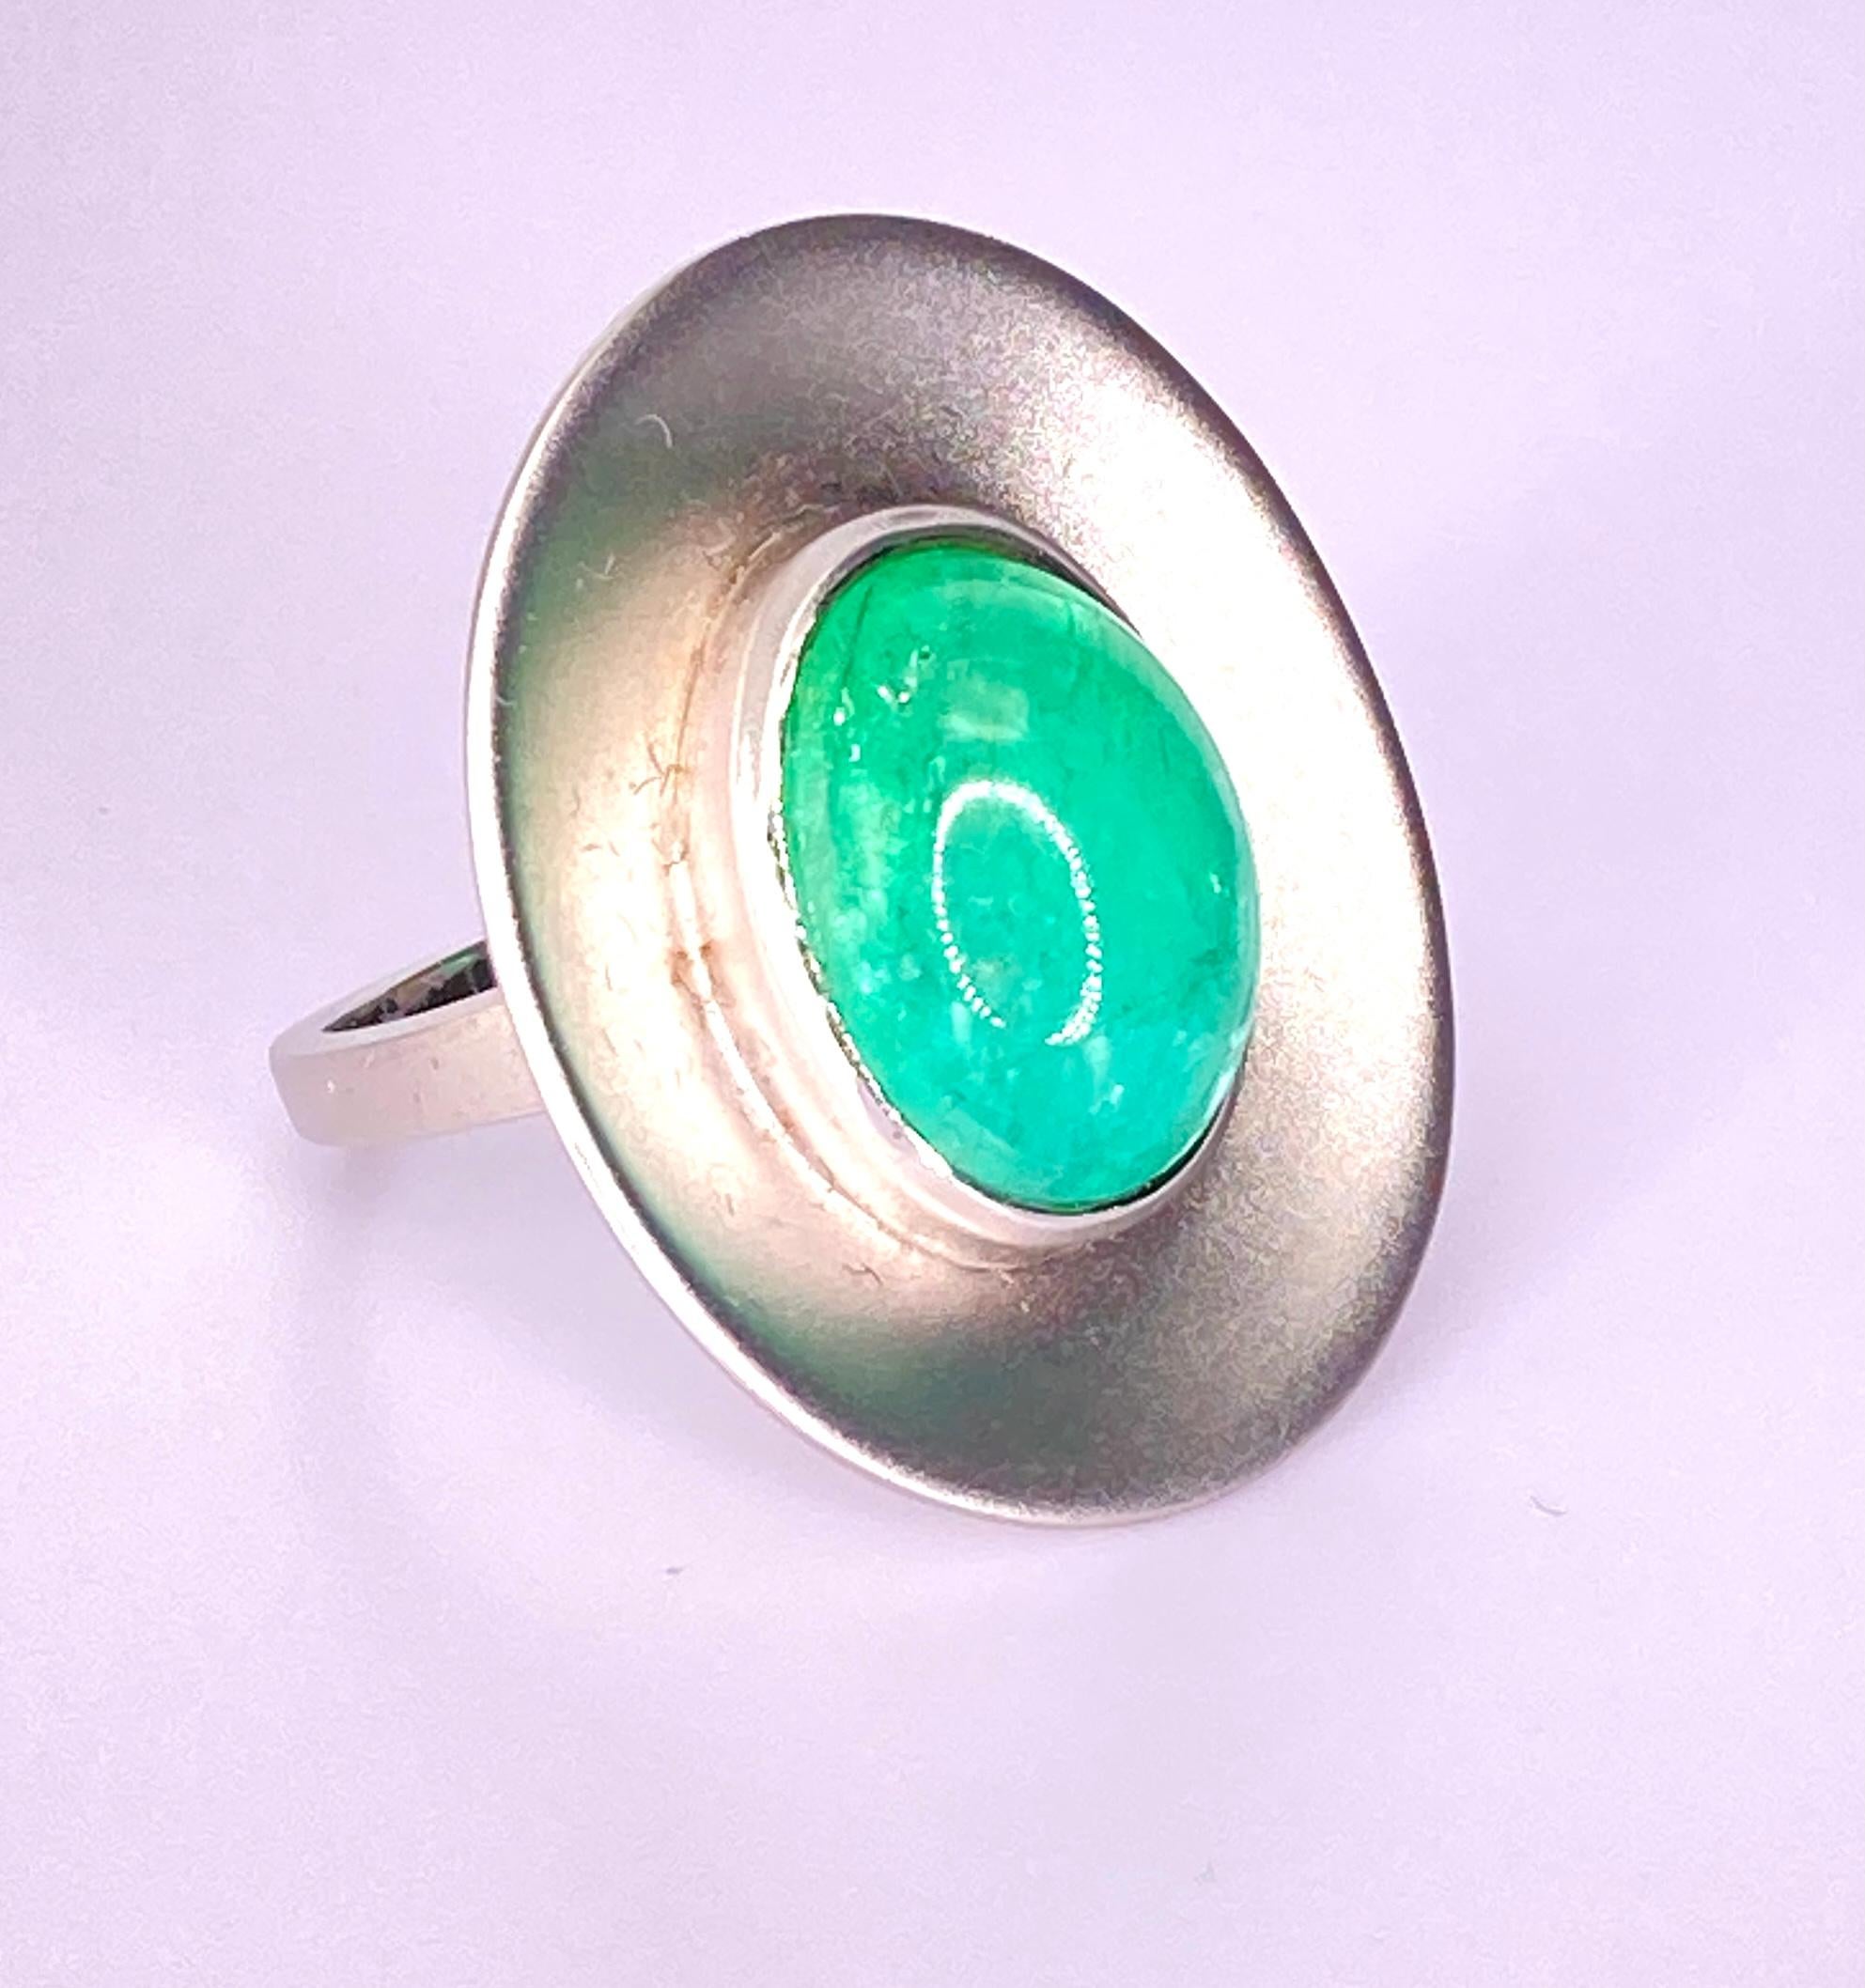 Contemporary 8 Carat Paraiba Tourmaline Cabochon 18Kt White Gold Ring For Sale